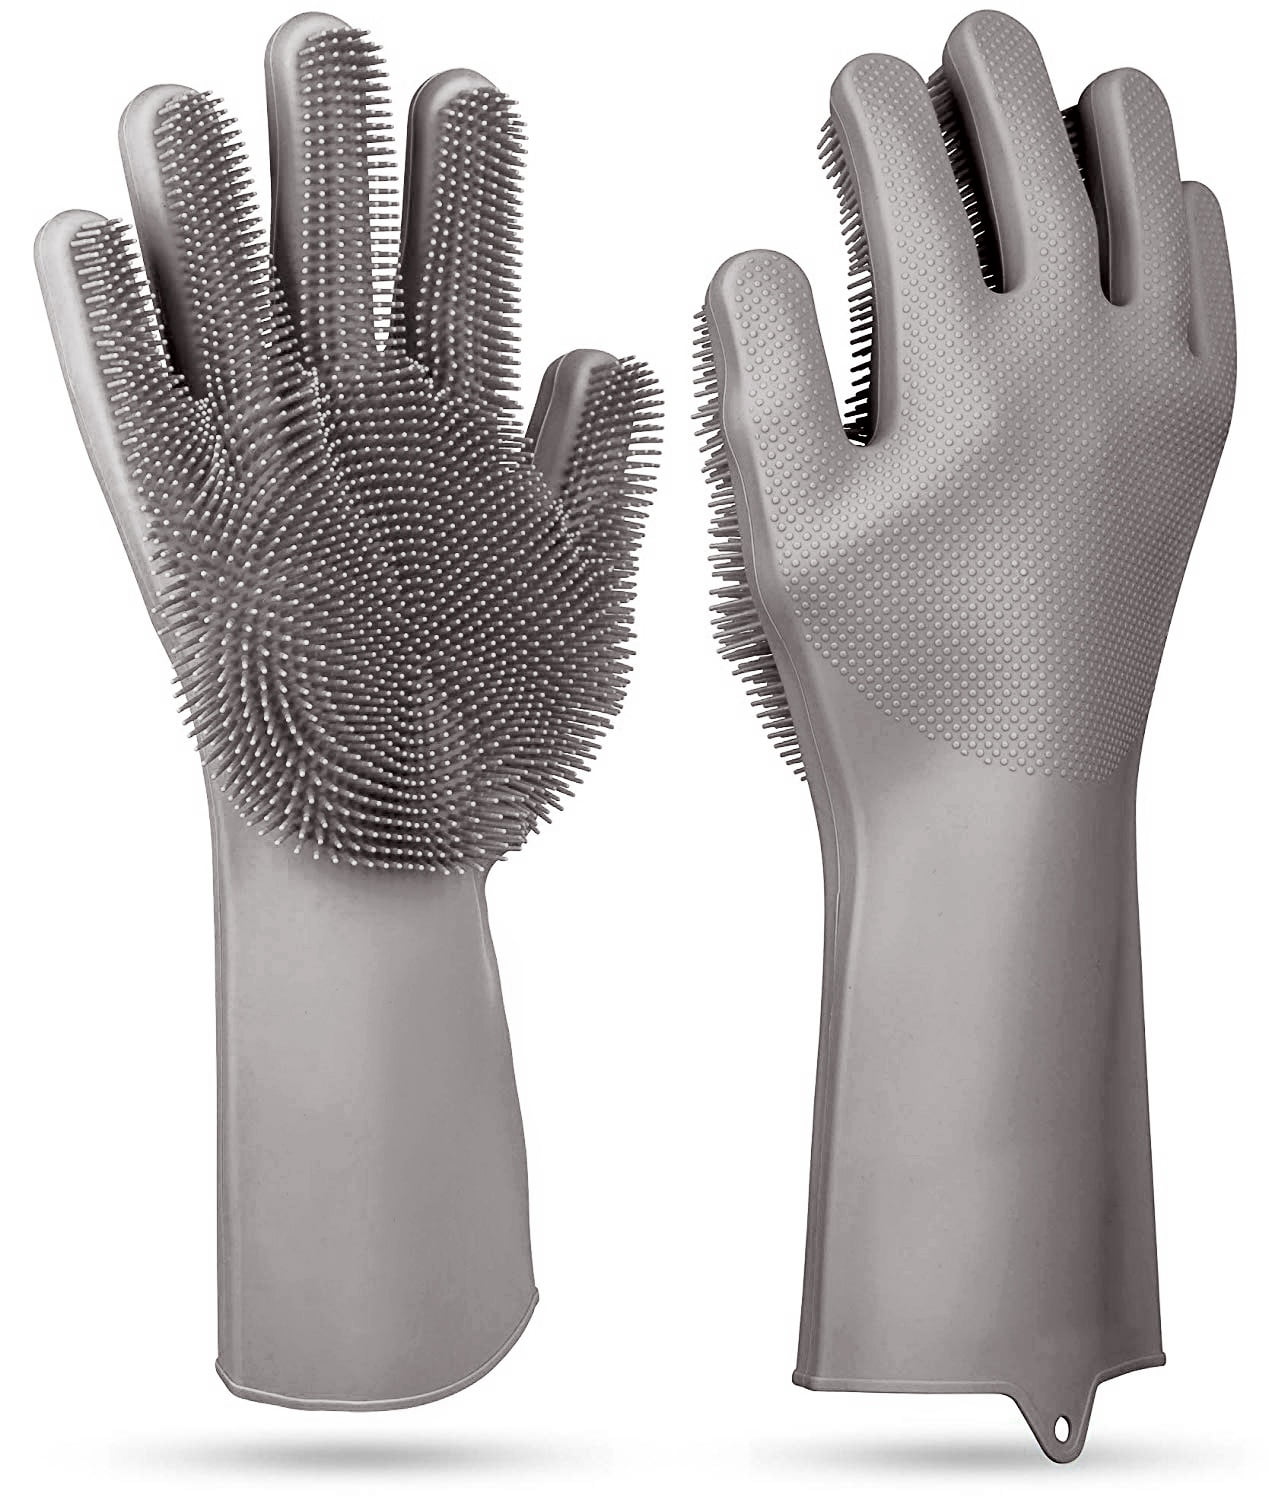 Tondiamo Heat Resistant Gloves with Silicone Bumps and 3 Rolls